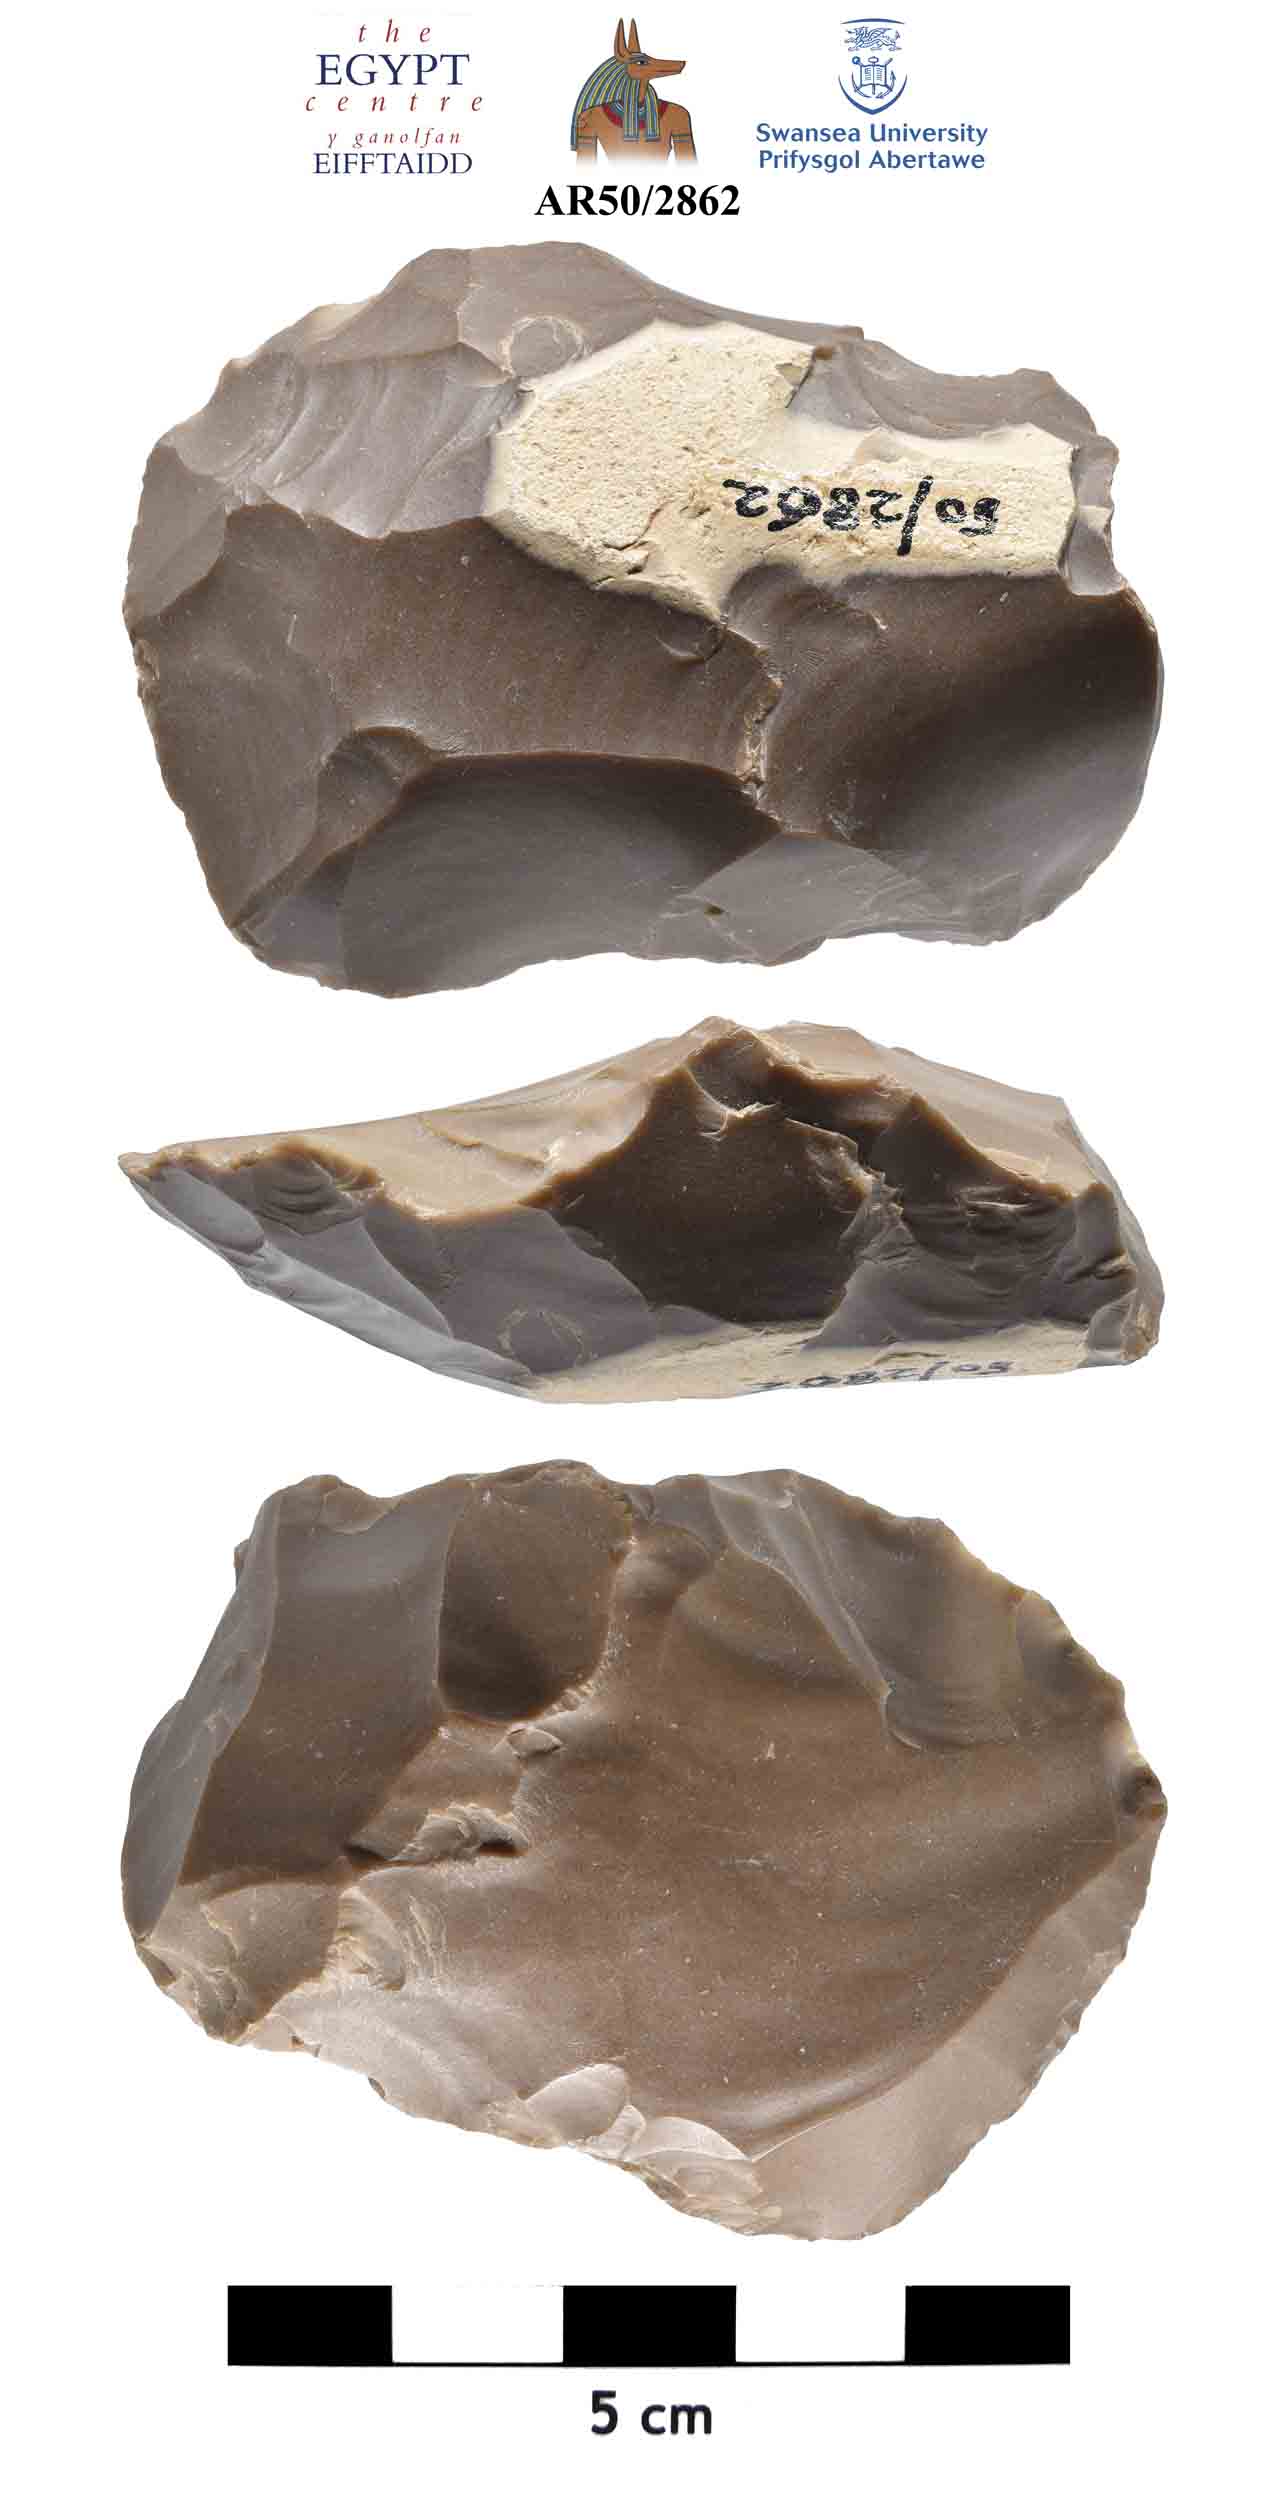 Image for: Flint tool